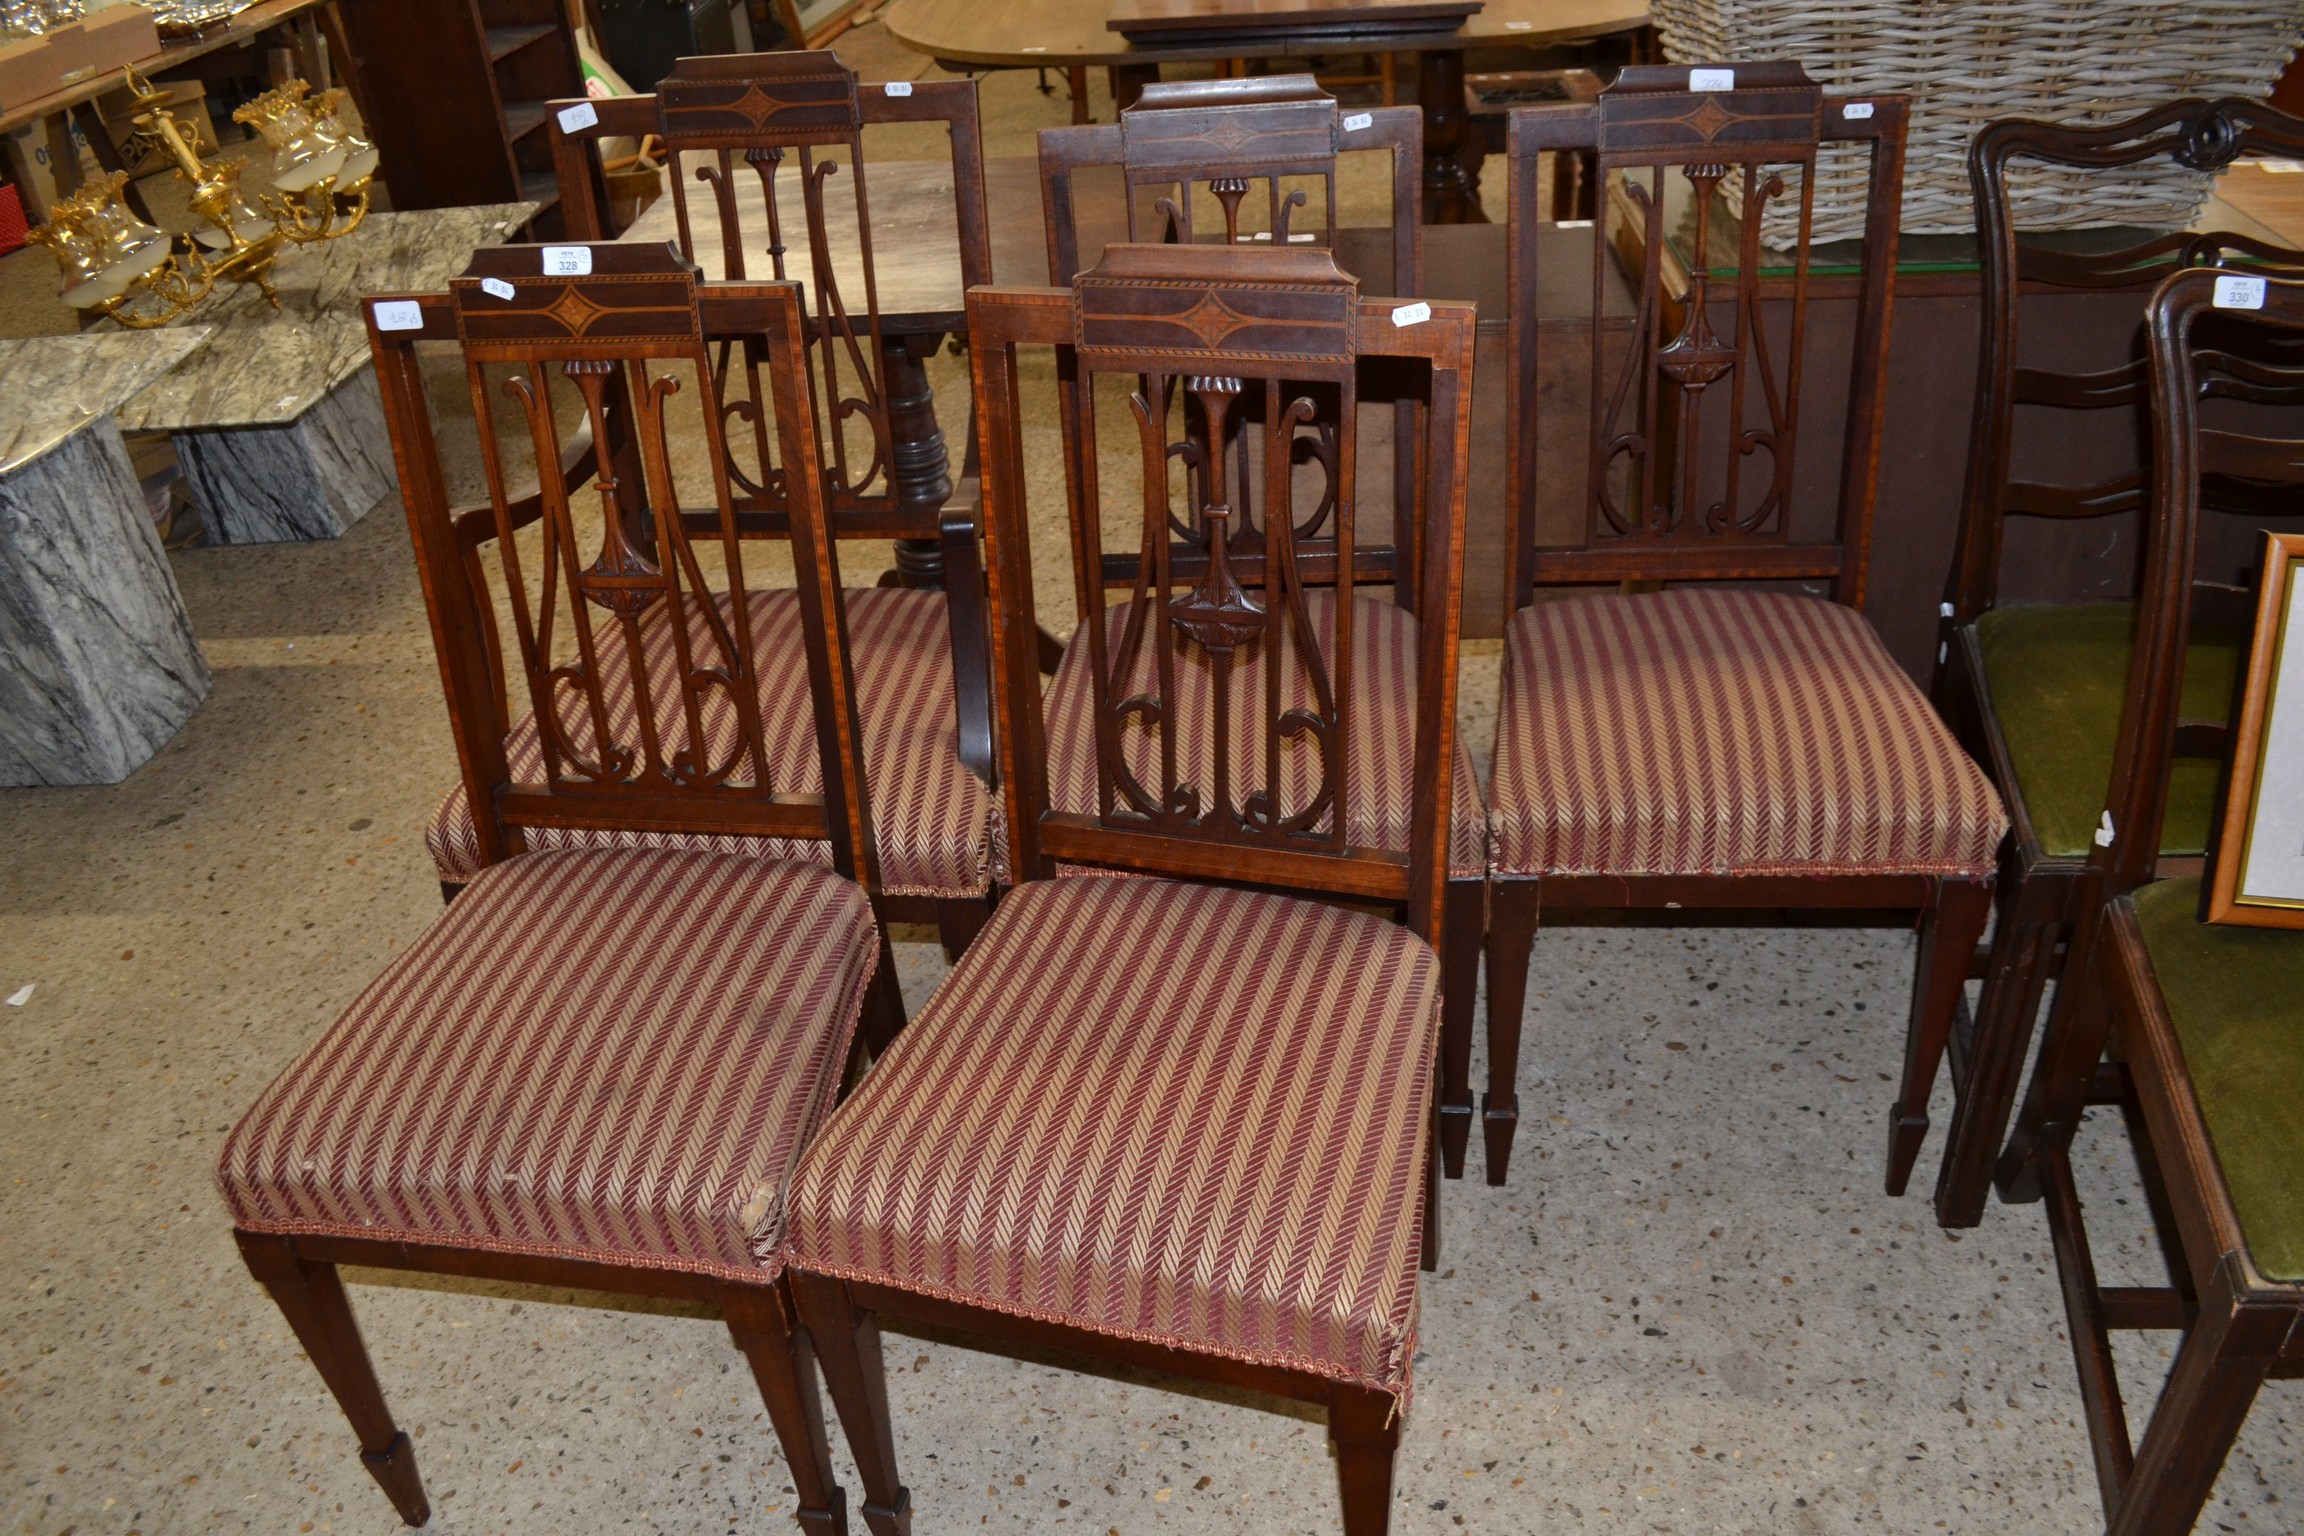 SET OF FIVE EDWARDIAN MAHOGANY DINING CHAIRS WITH STRIPED UPHOLSTERED SEATS